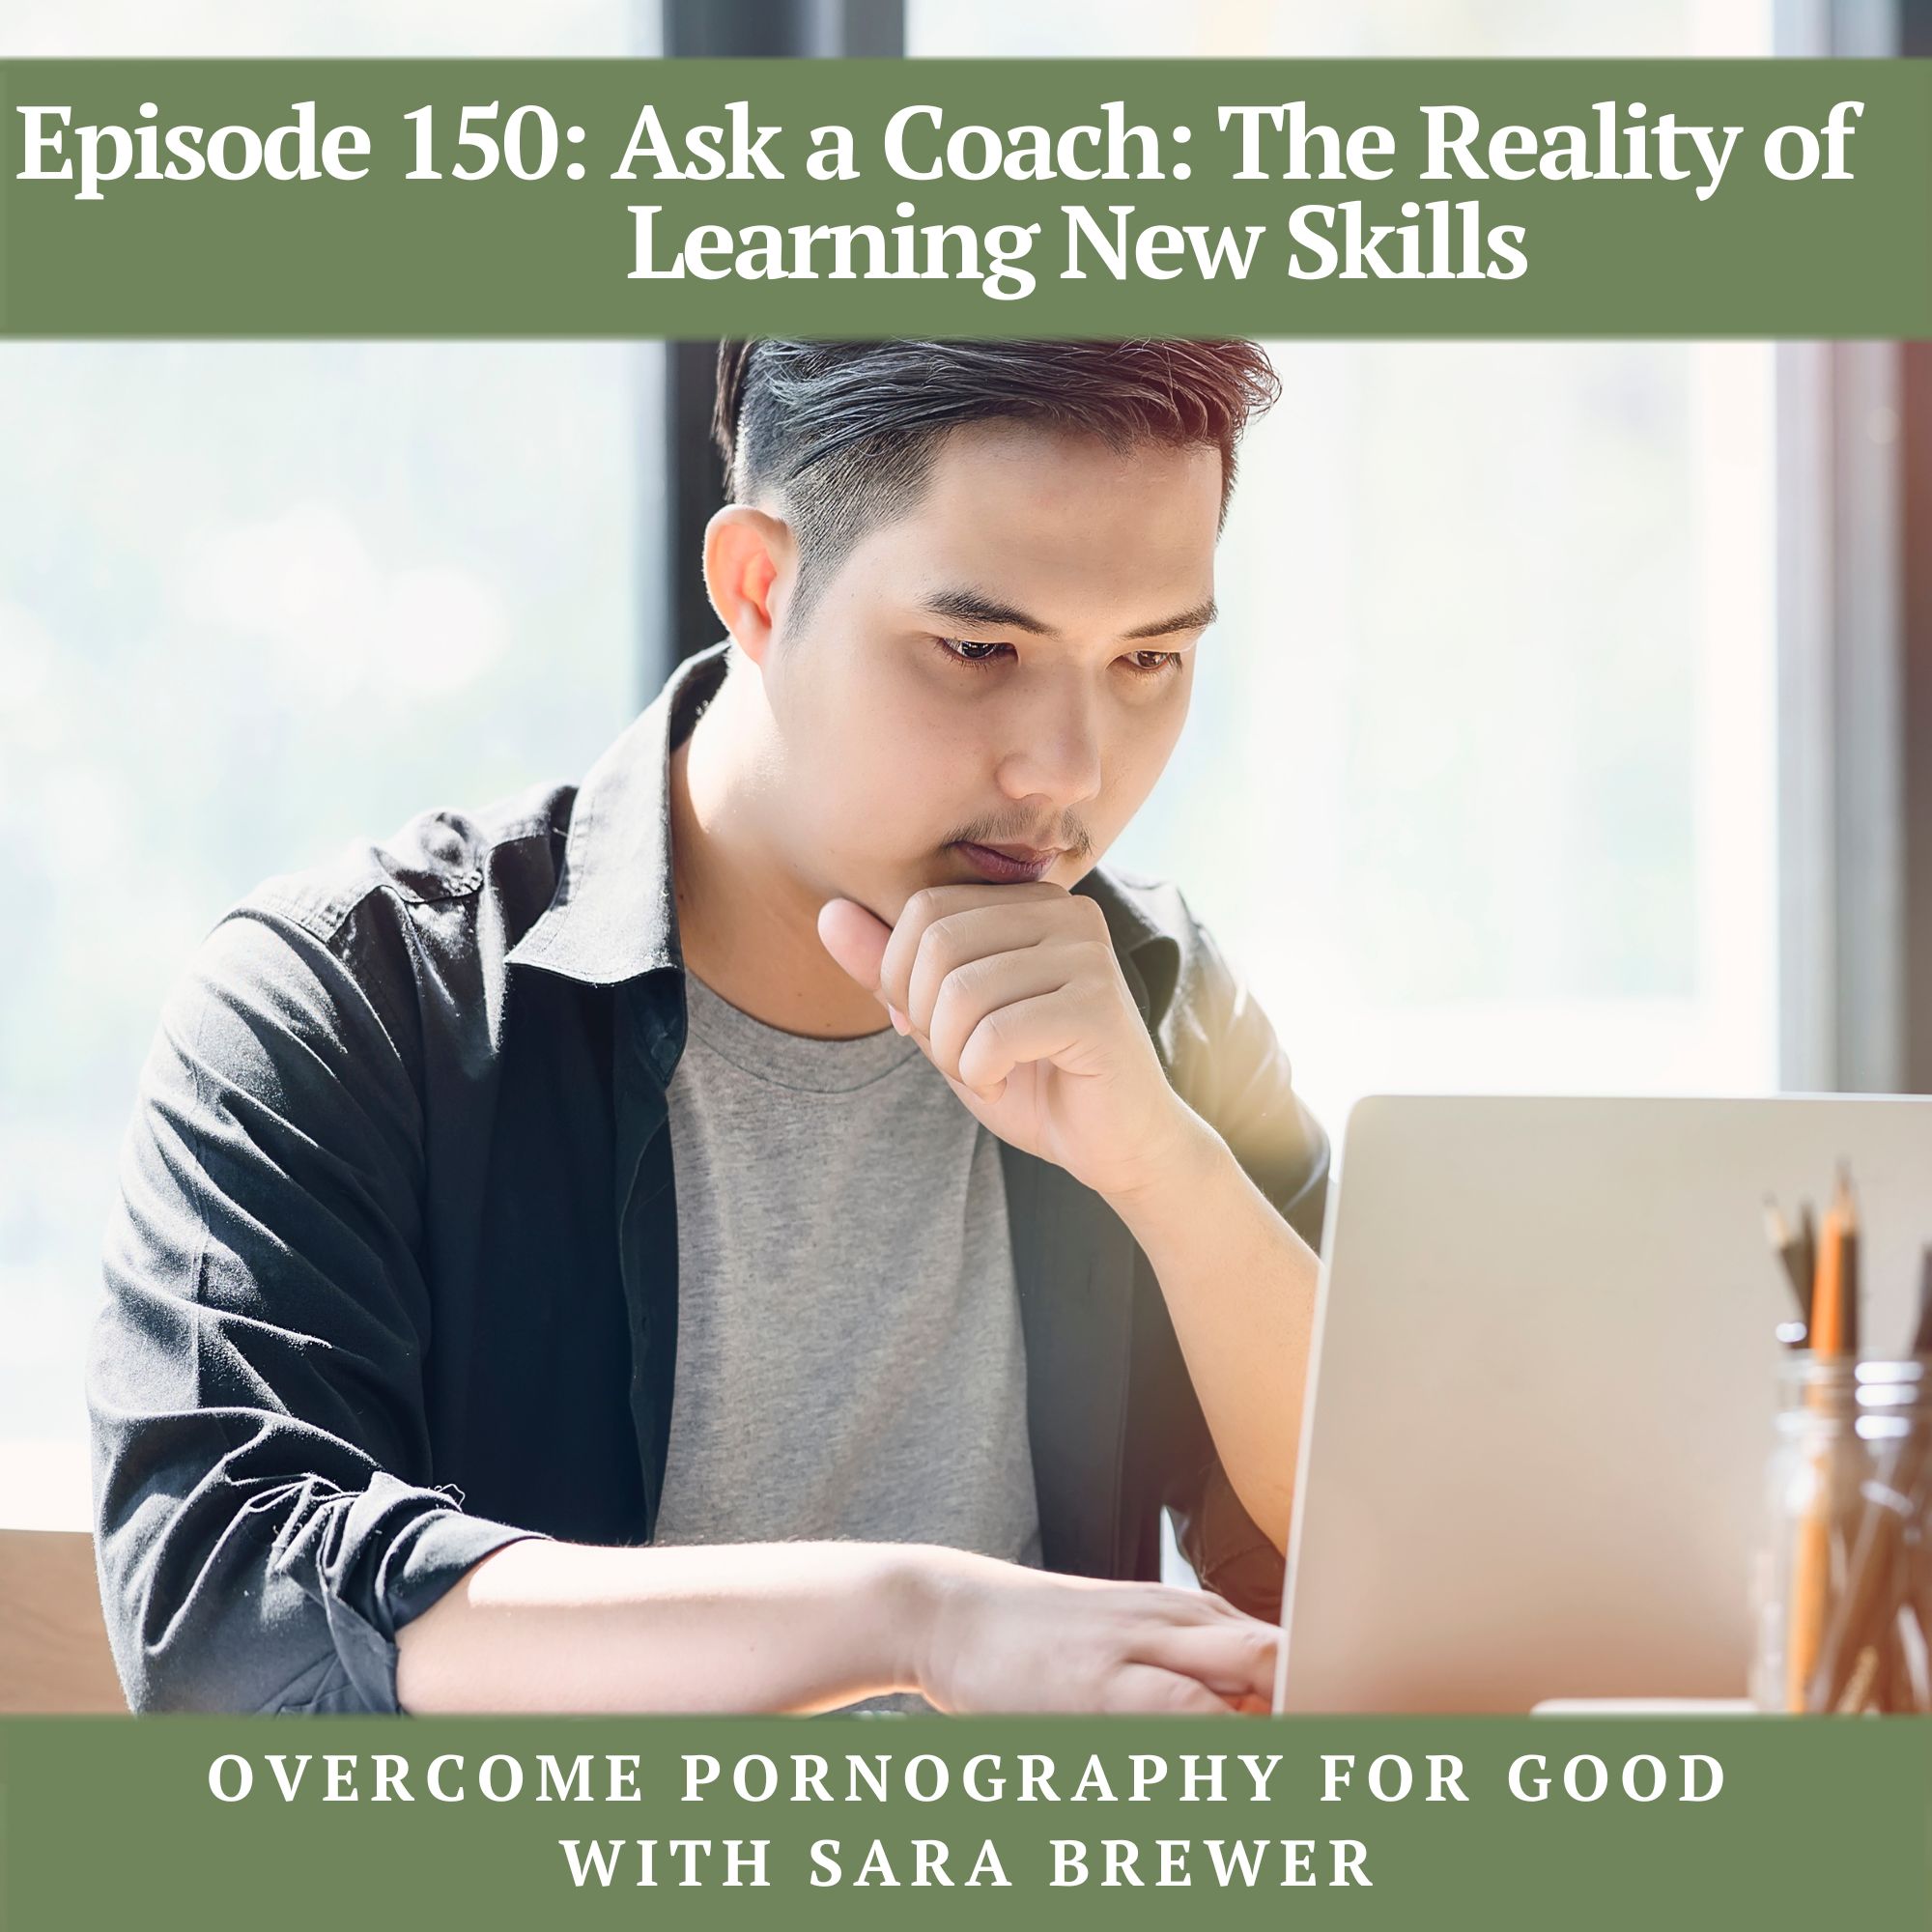 Episode 150: Ask a Coach: The Reality of Learning New Skills